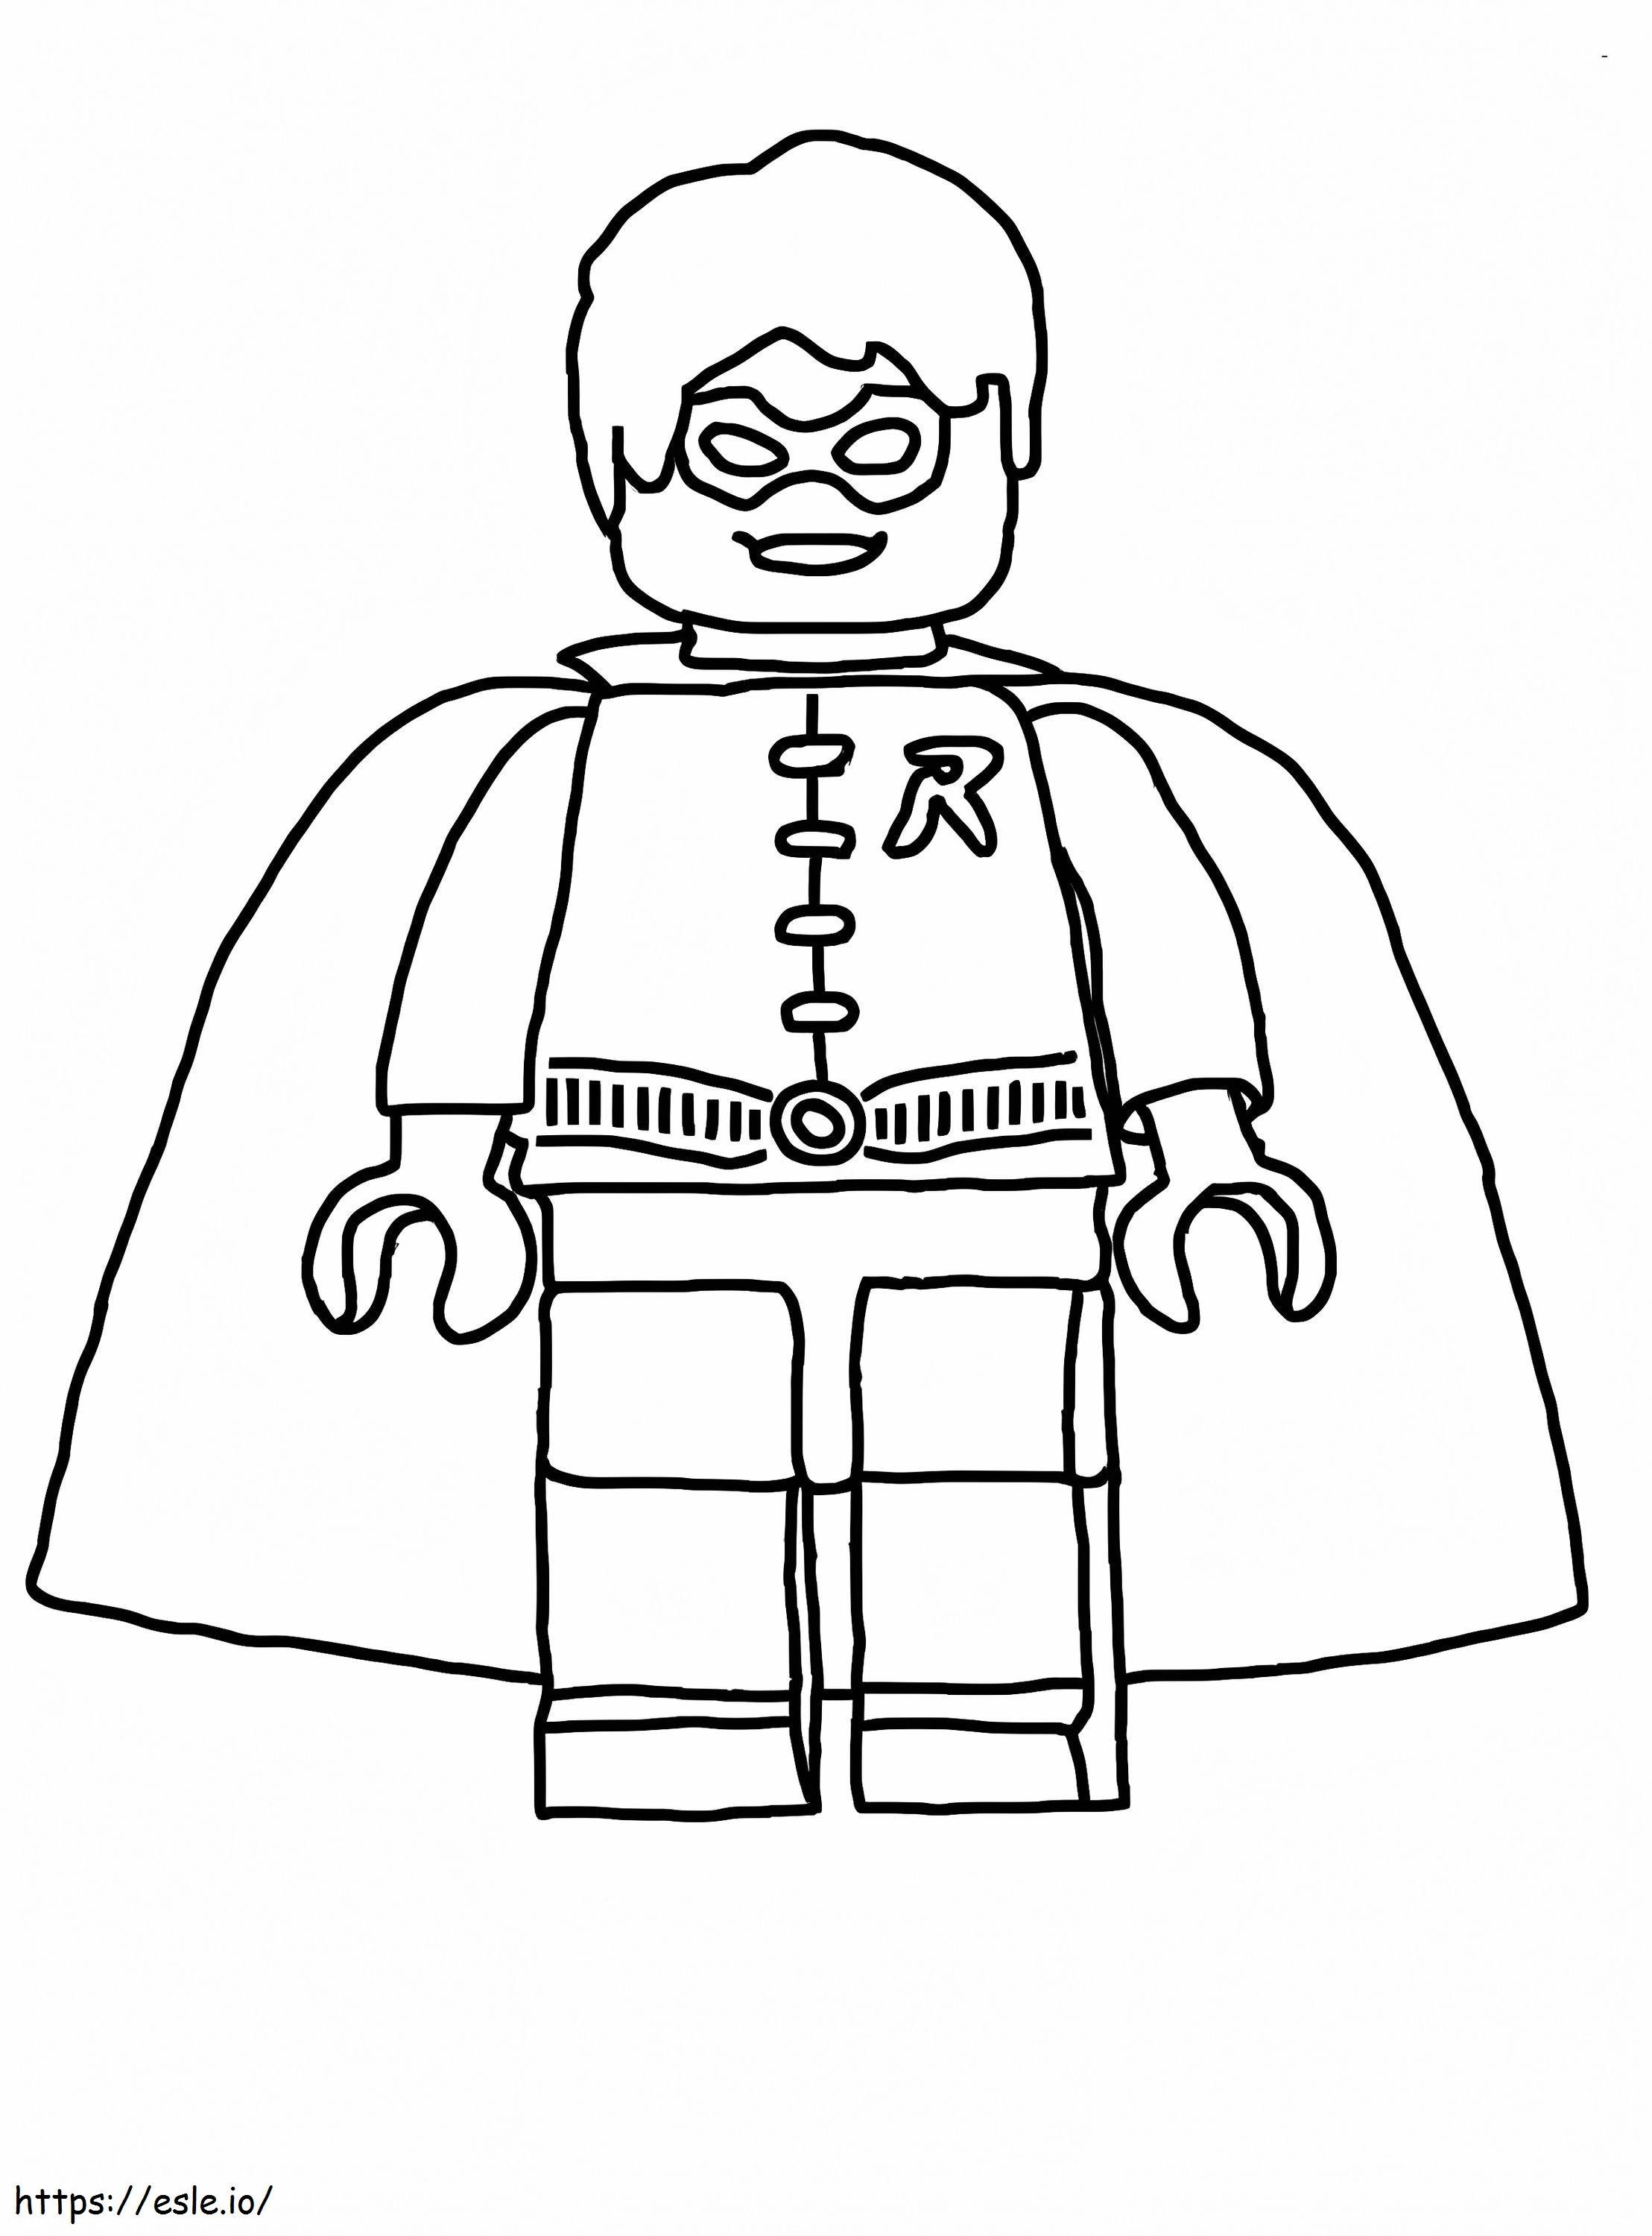 Awesome Lego Robin coloring page